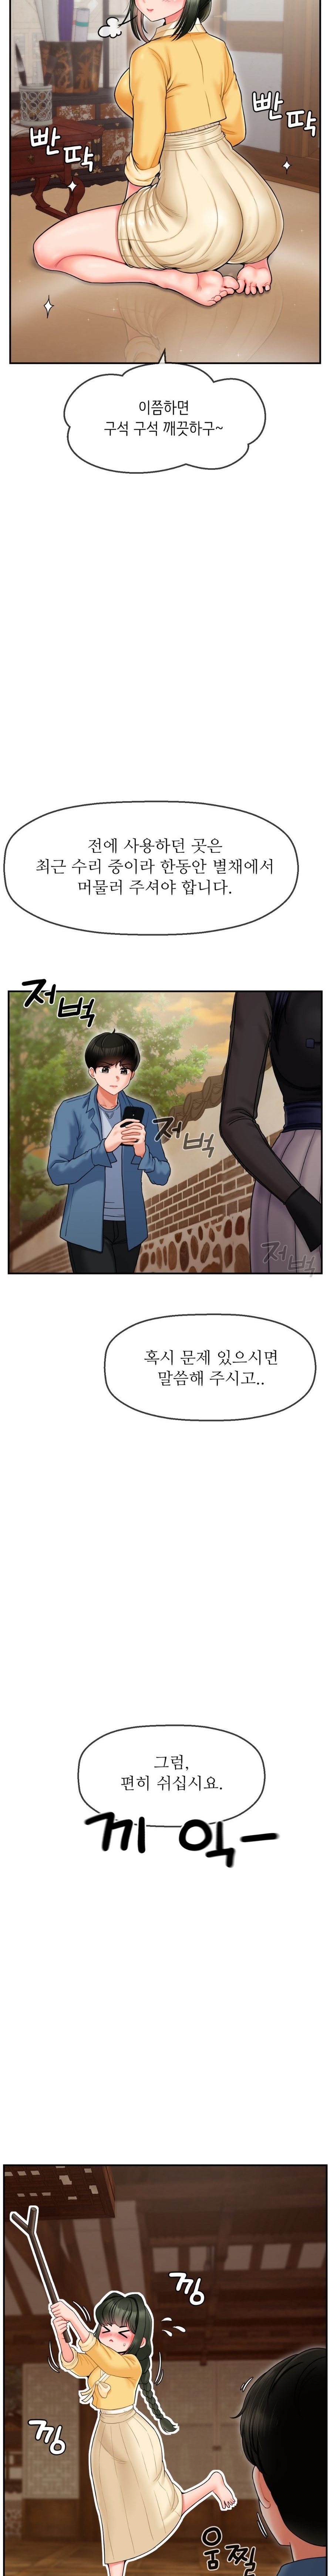 Seventeenth Only Son Raw - Chapter 2 Page 4